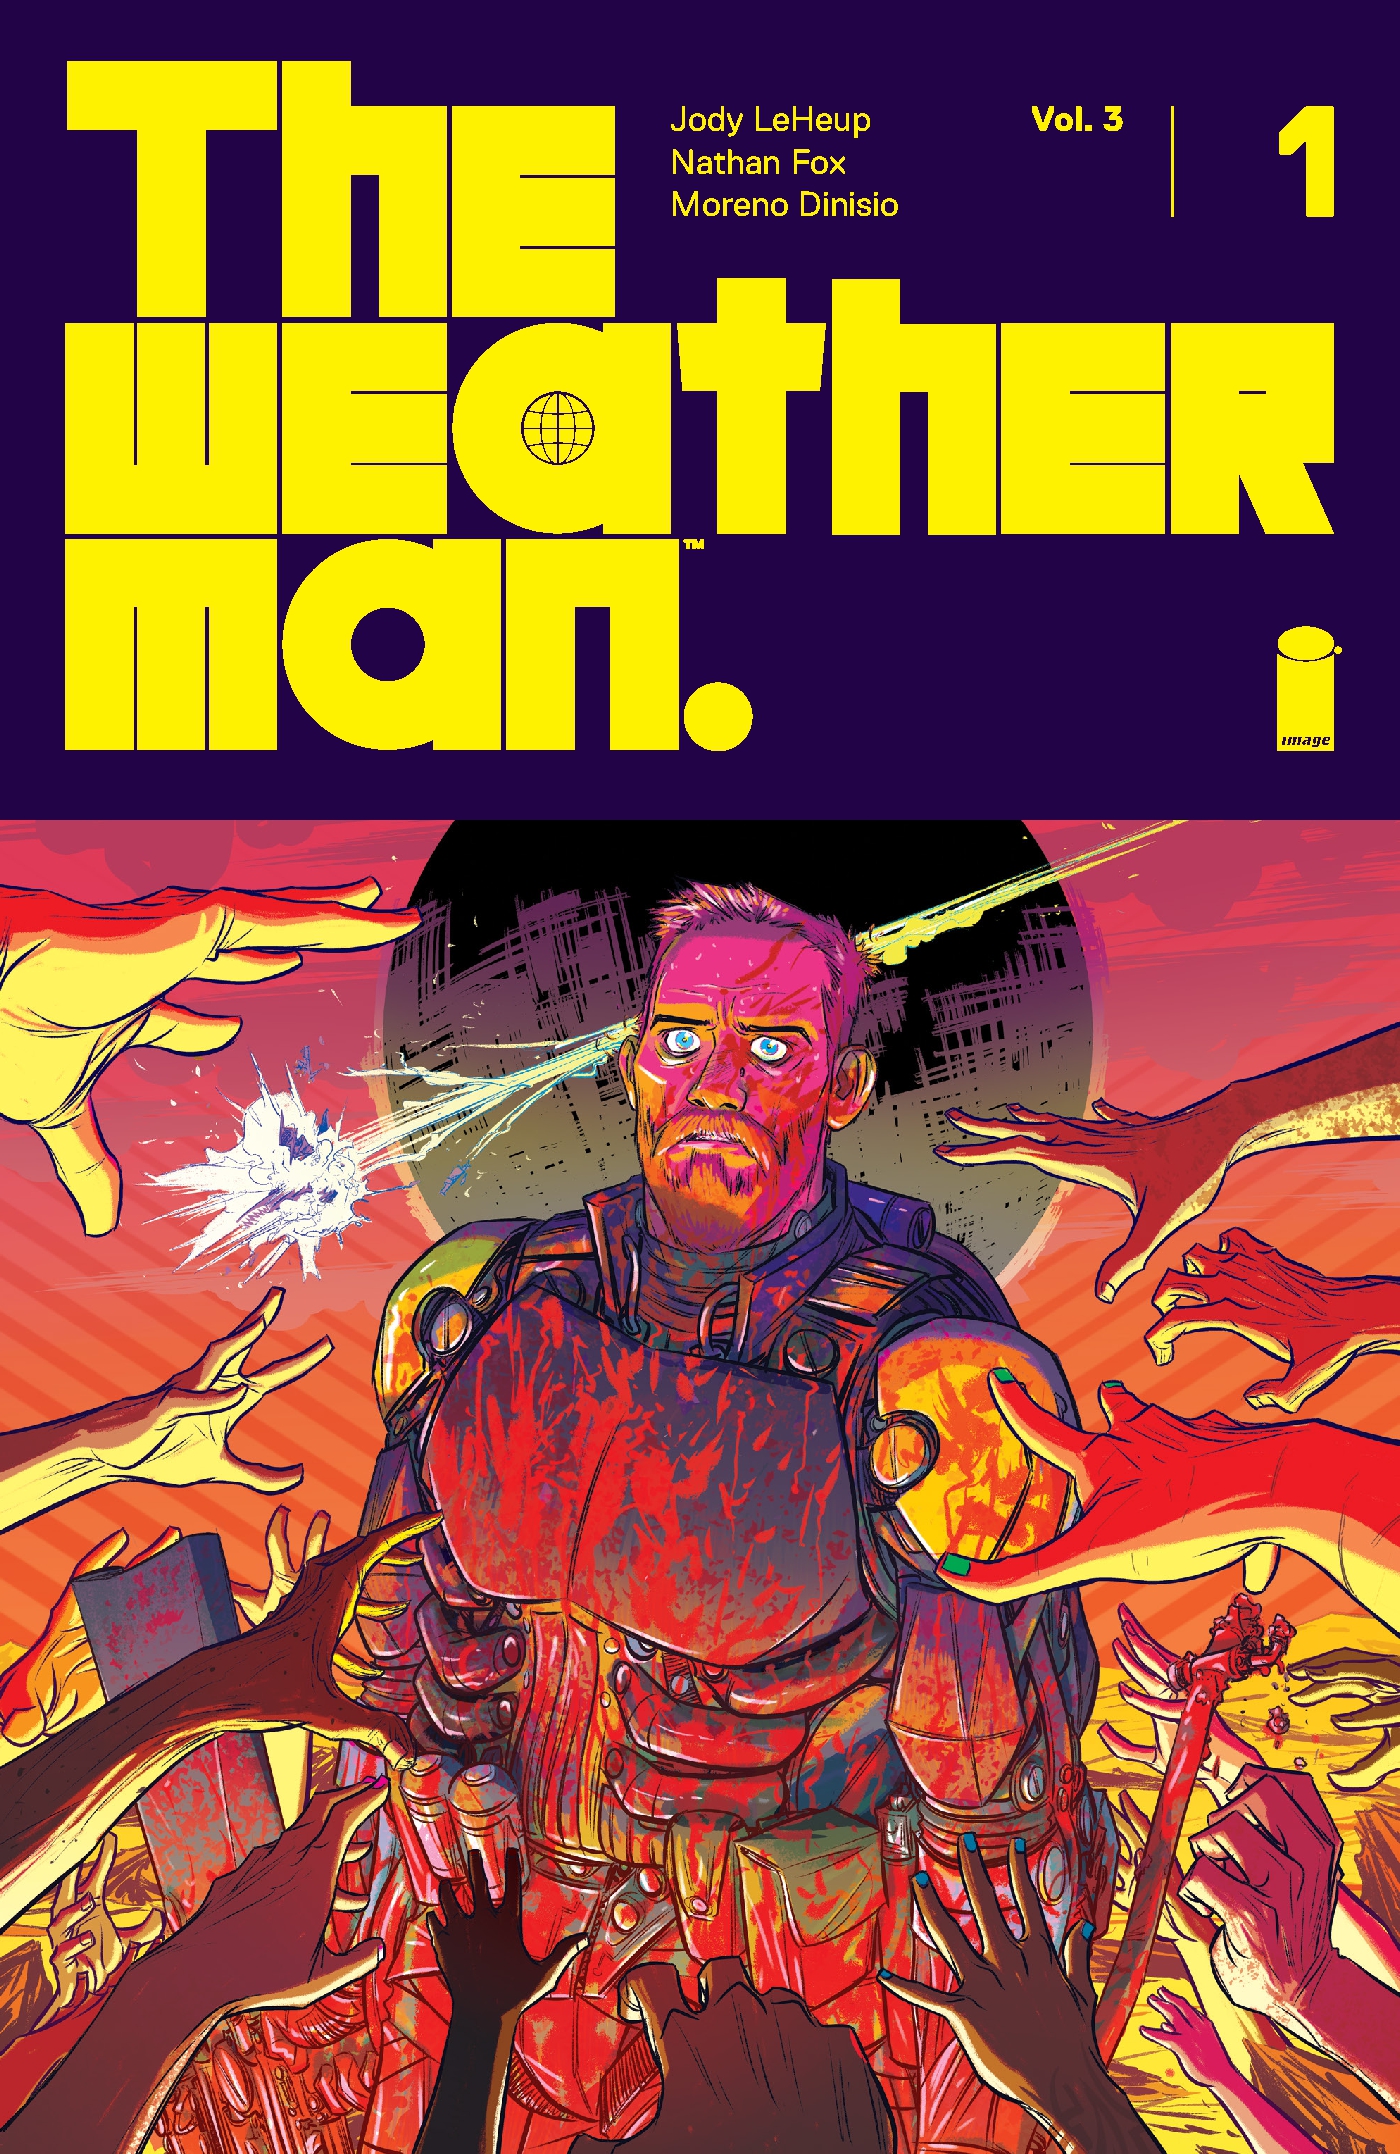 This image is the cover for the book The Weatherman vol. 3 #1, The Weatherman